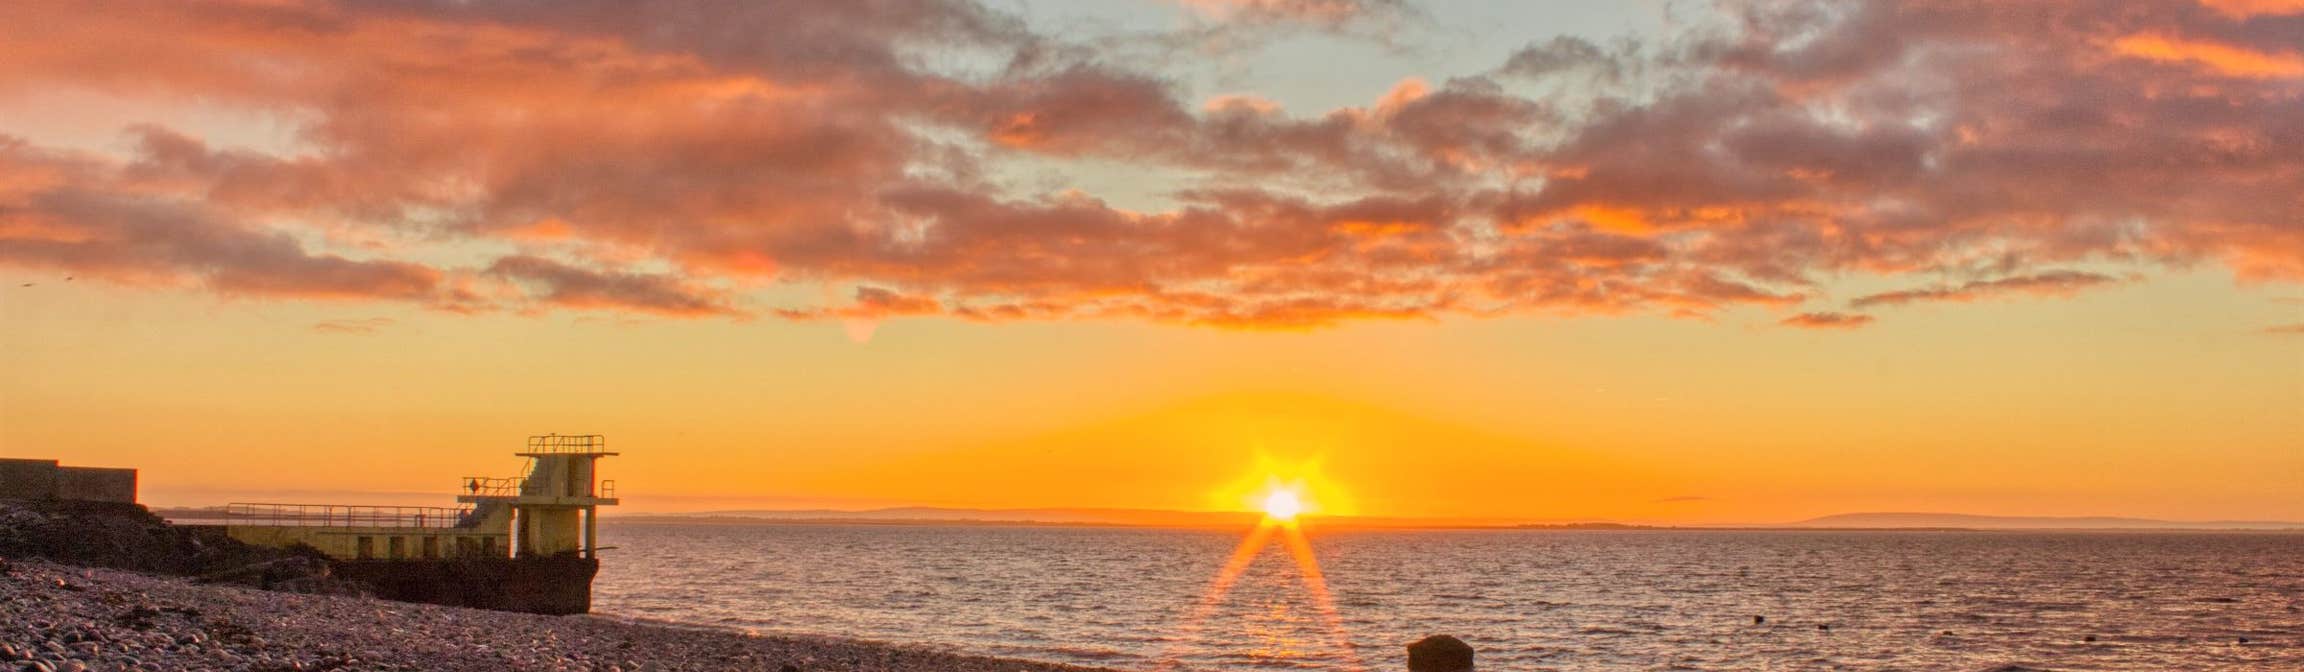 Image of the sun in Salthill in County Galway